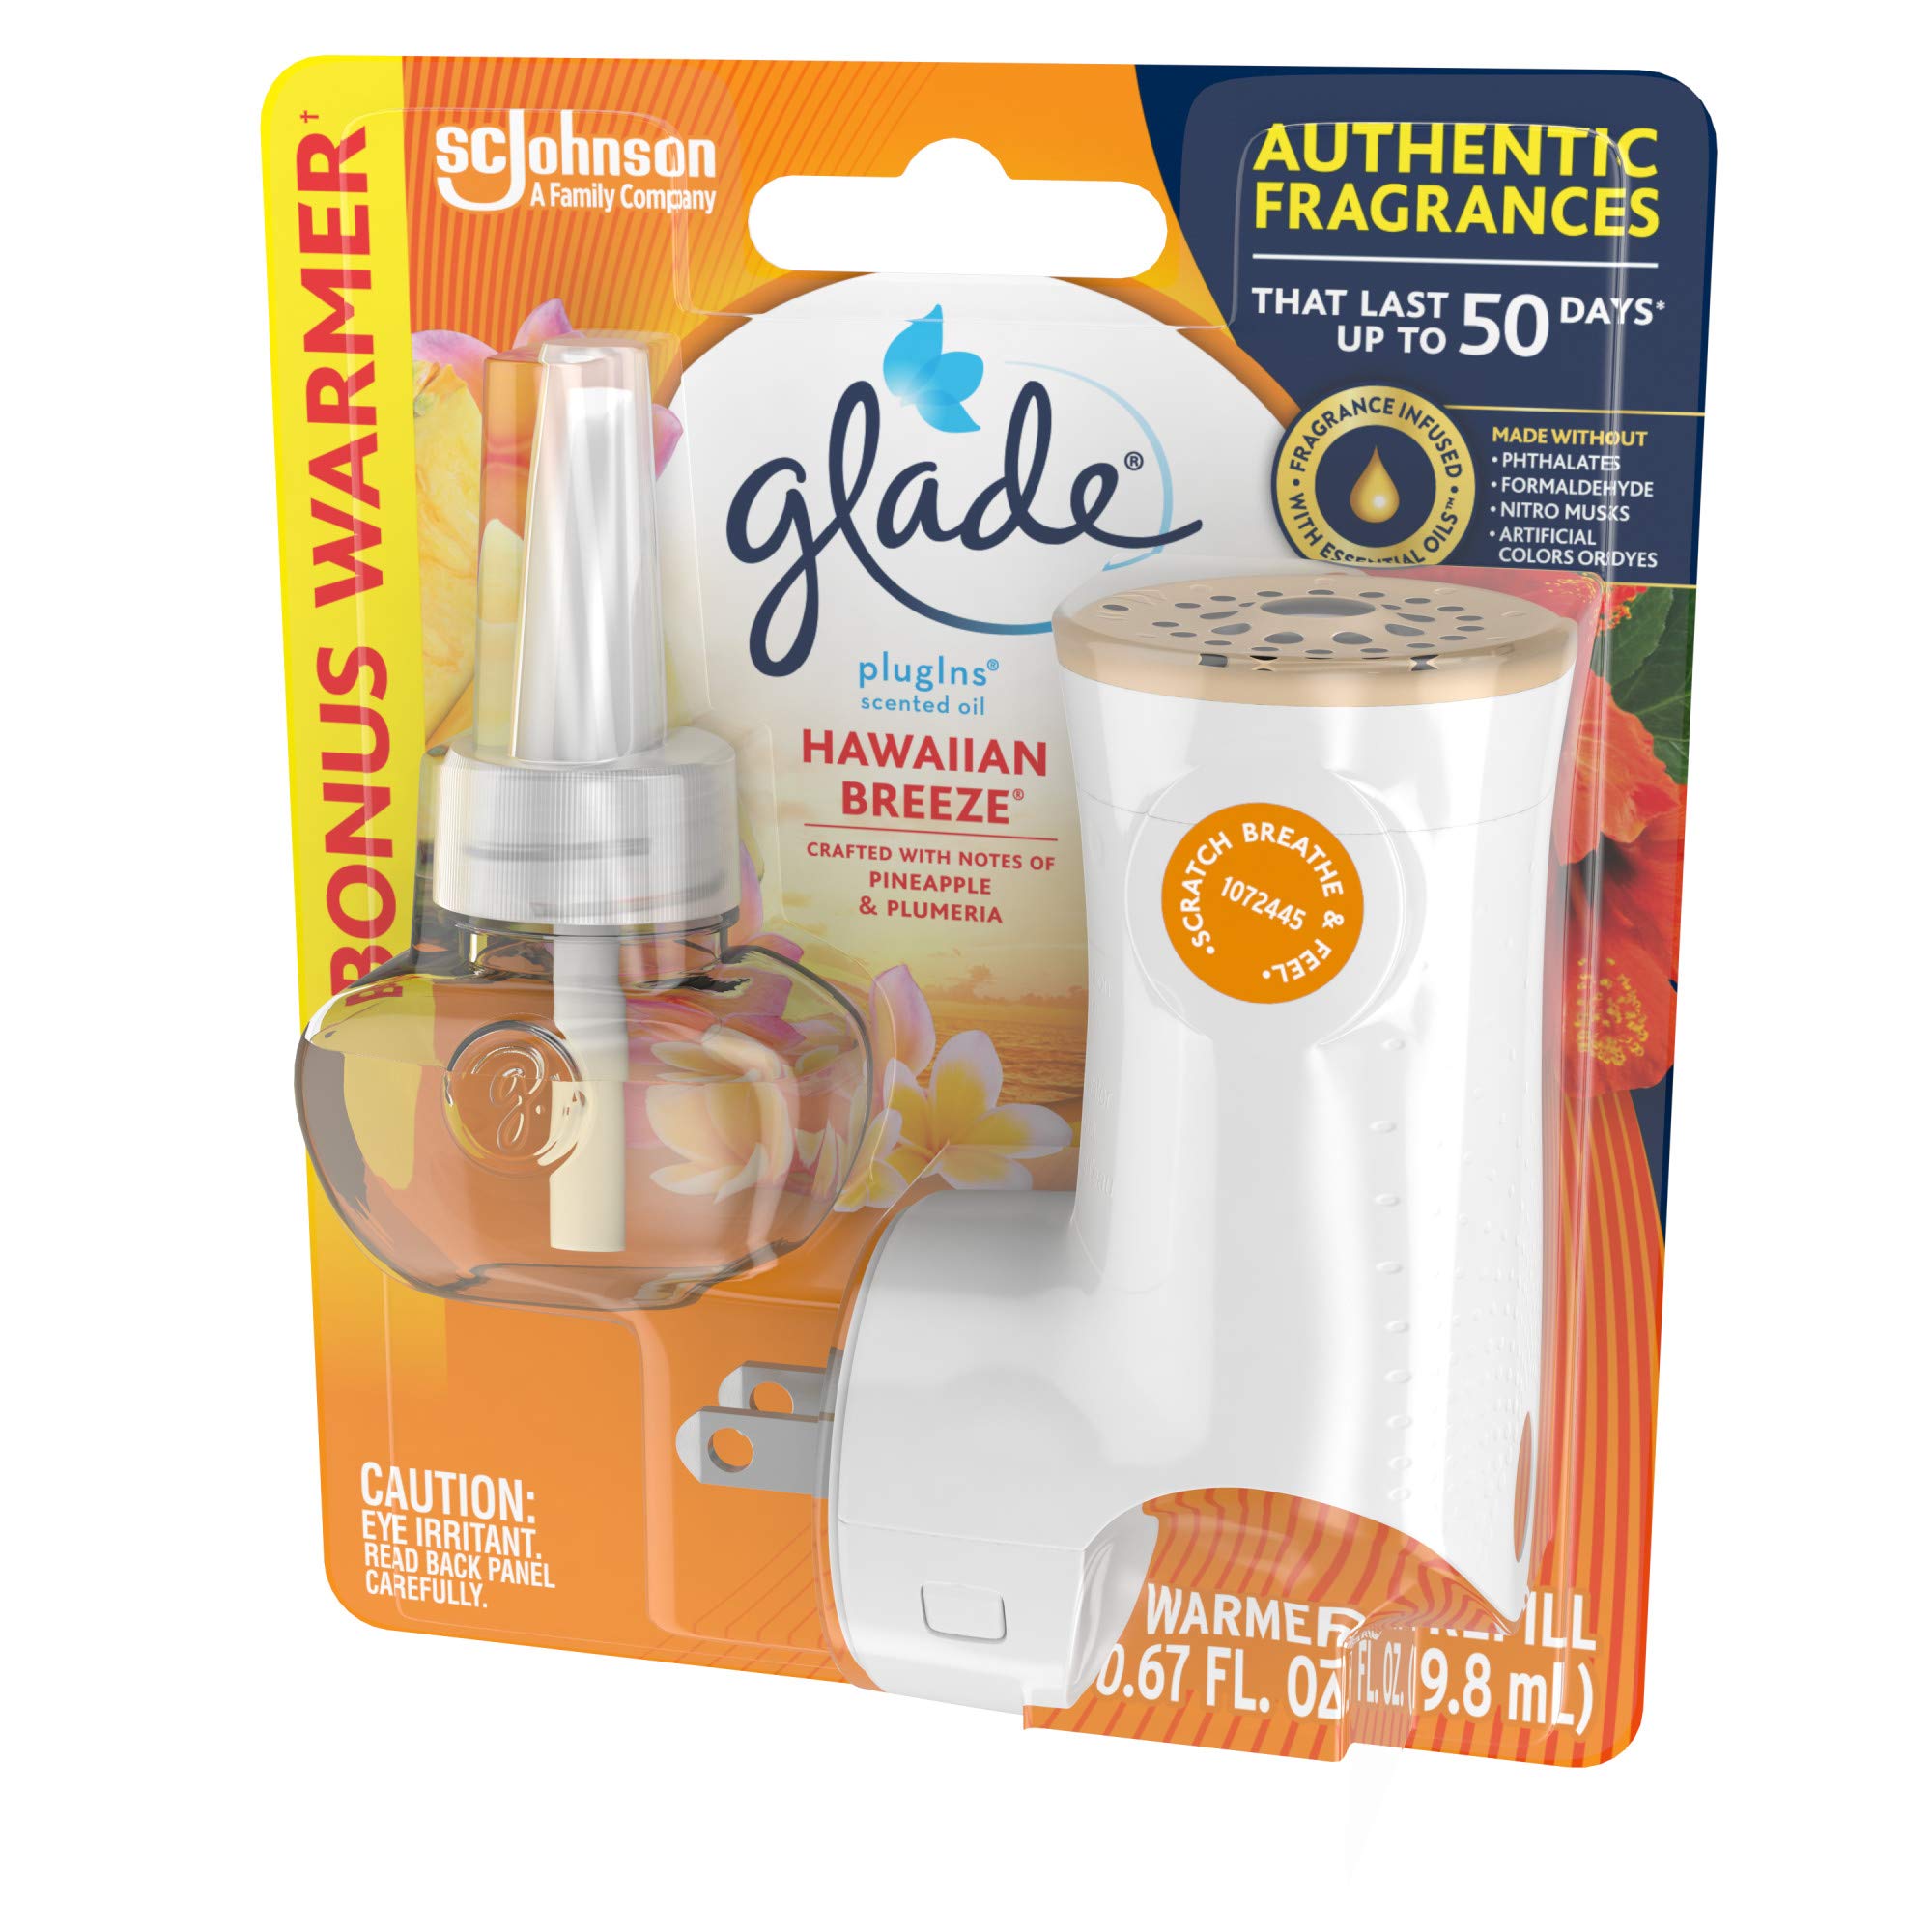 Glade PlugIns Refills Air Freshener Starter Kit, Scented Oil for Home and Bathroom, Hawaiian Breeze, 0.67 Fl Oz, 1 Warmer + 1 Refill